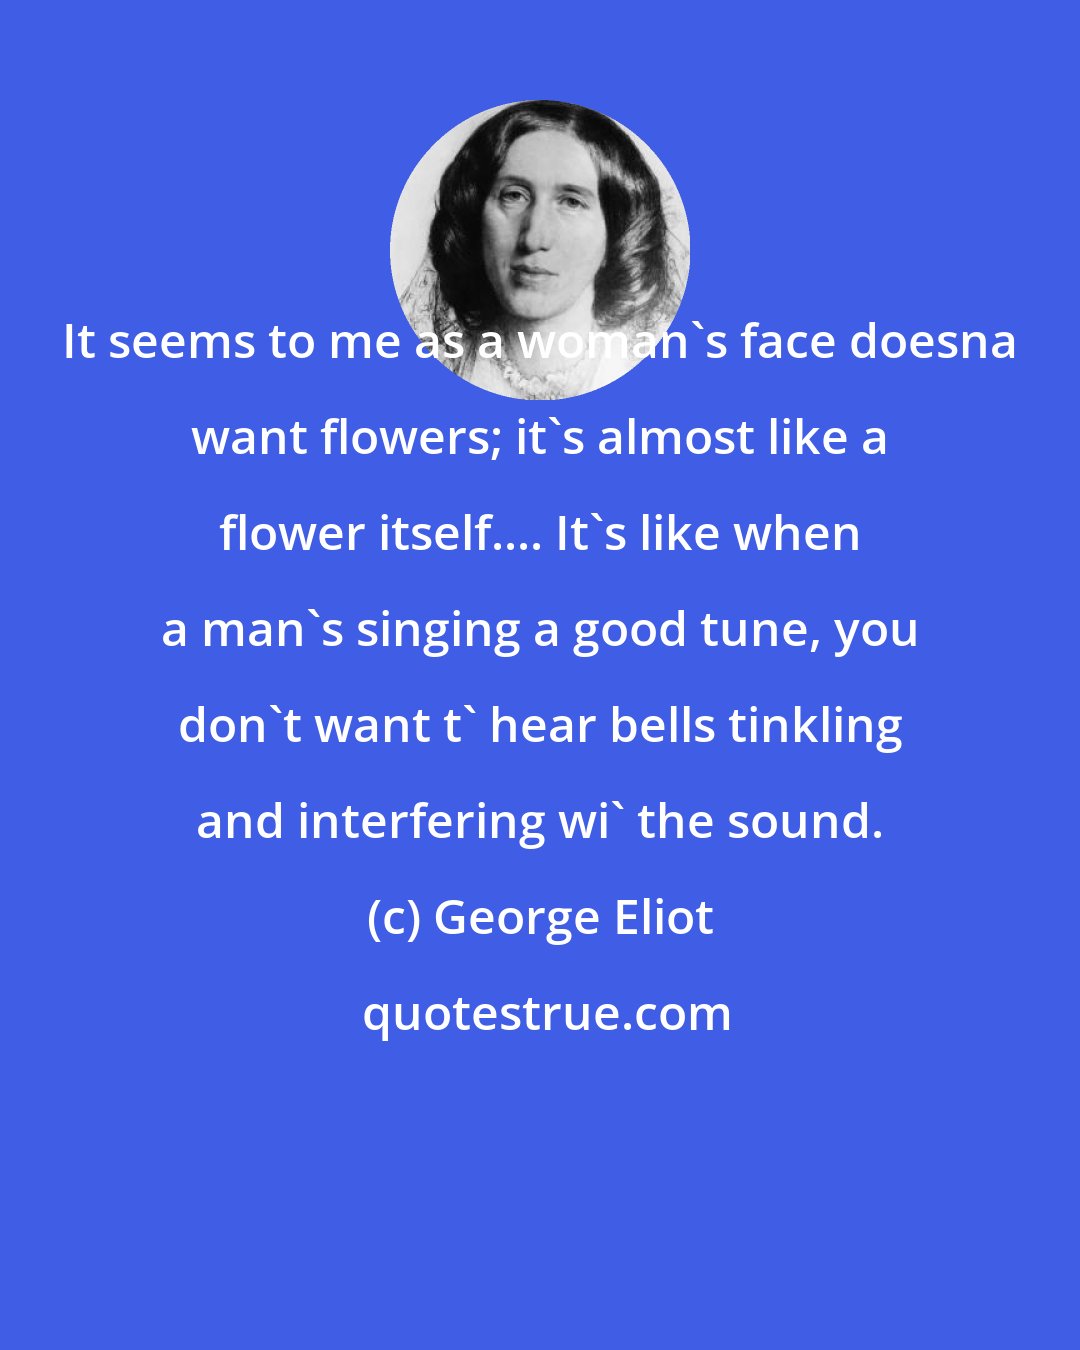 George Eliot: It seems to me as a woman's face doesna want flowers; it's almost like a flower itself.... It's like when a man's singing a good tune, you don't want t' hear bells tinkling and interfering wi' the sound.